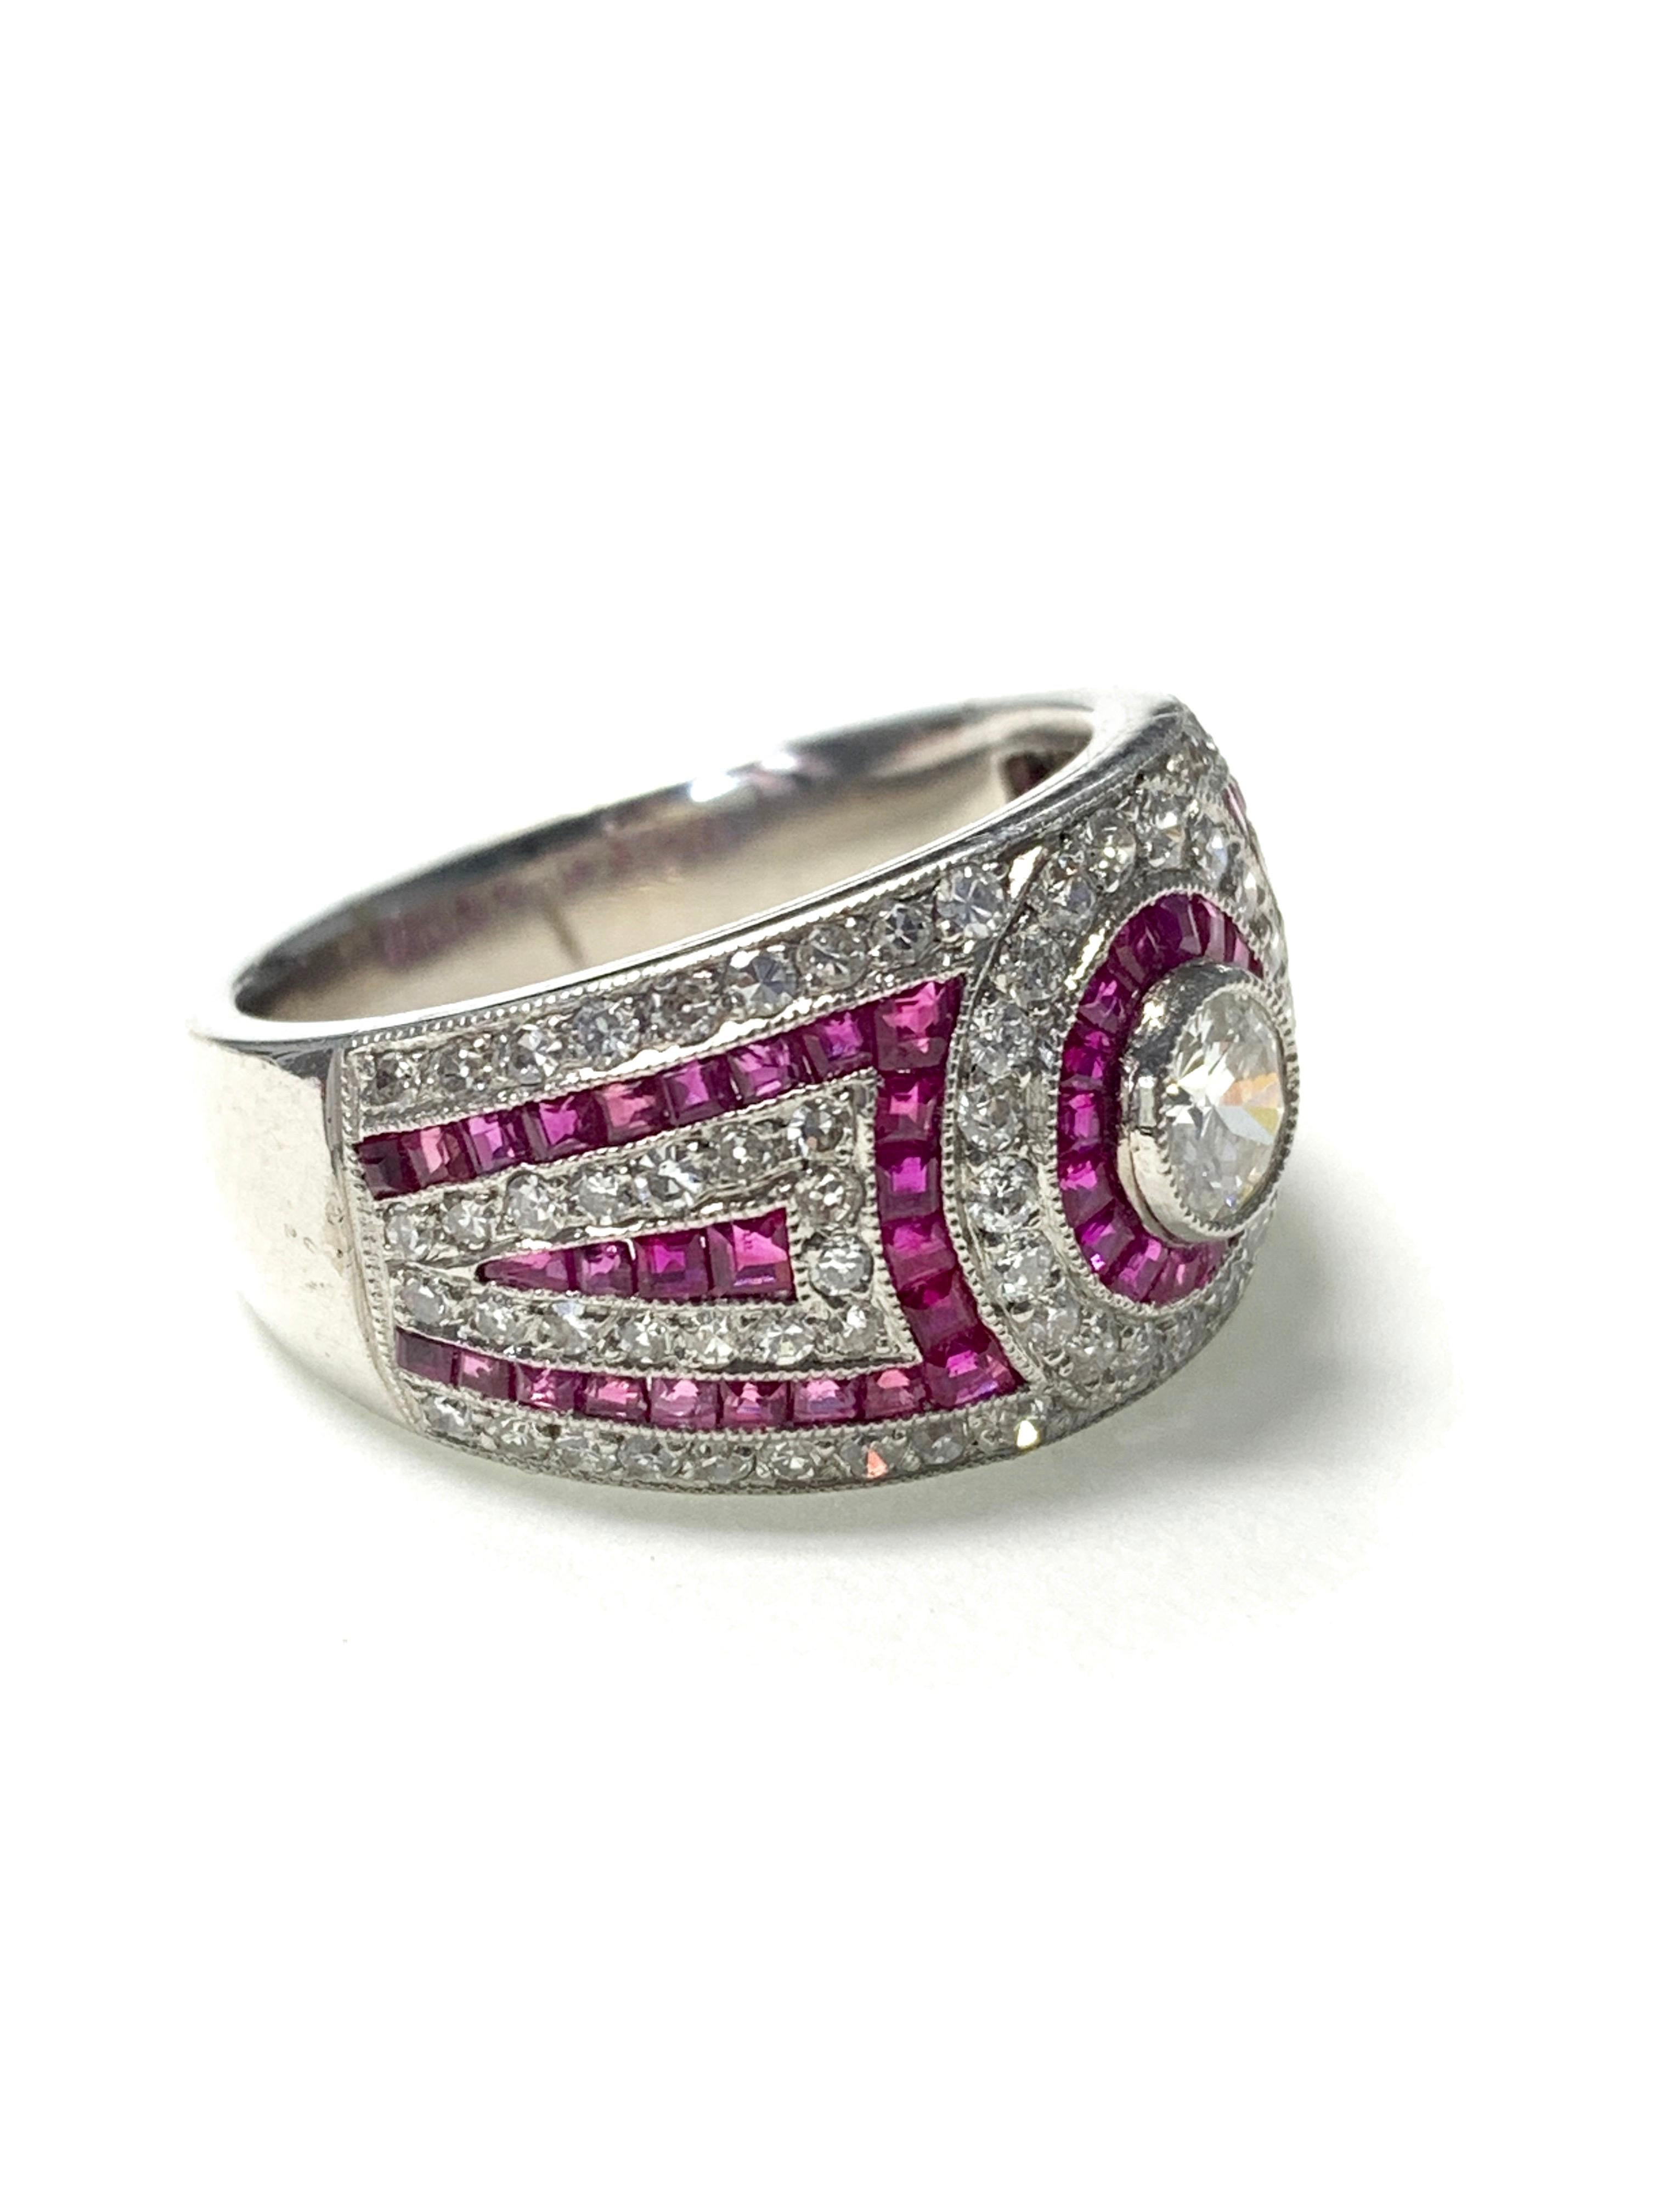 Diamond and Ruby Engagement Ring in Platinum In Excellent Condition For Sale In New York, NY